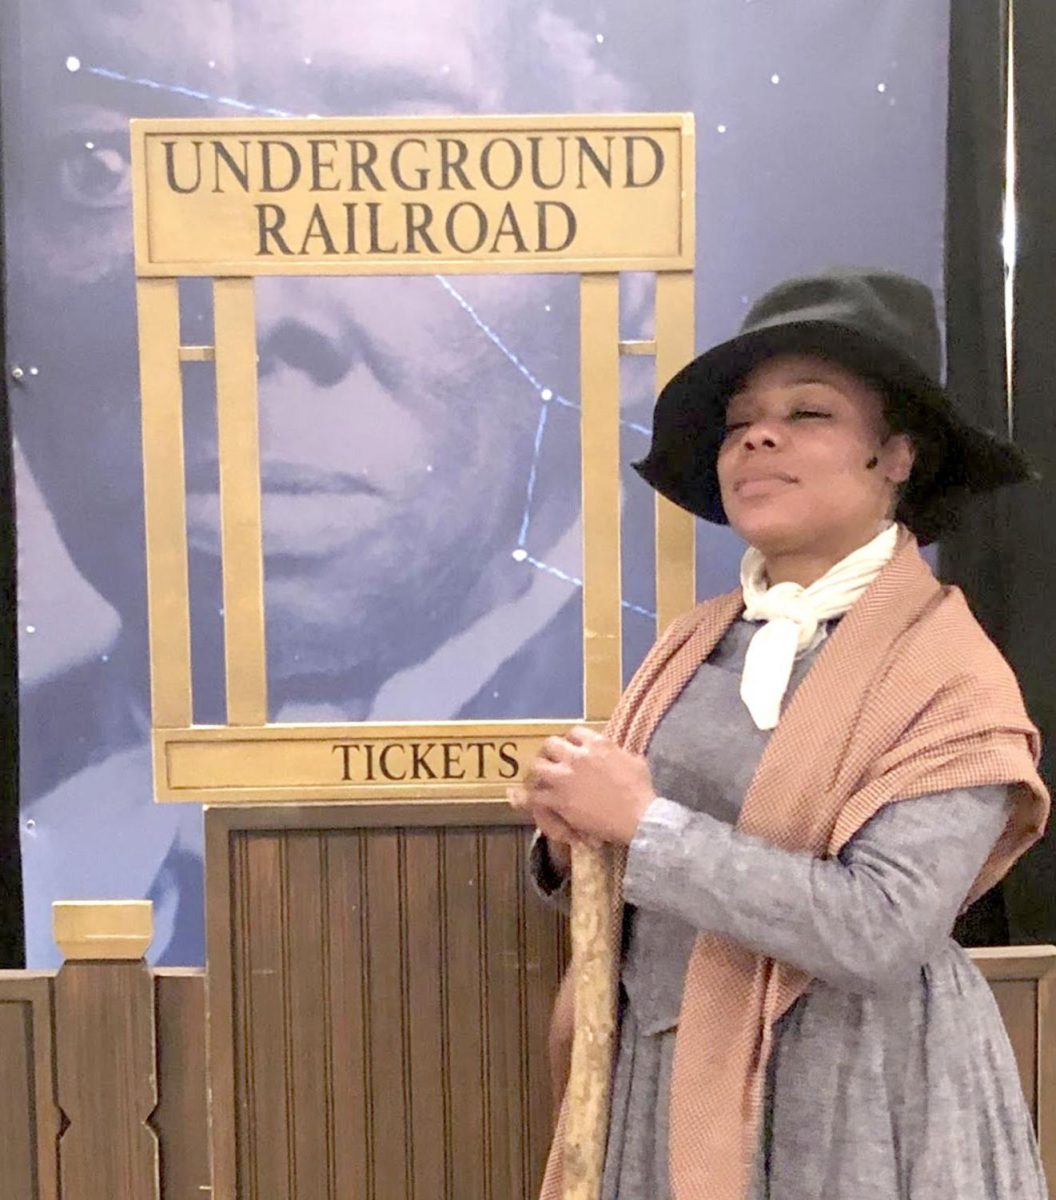 Brandi Sherrill, portraying Harriet Tubman in a one-woman show at the Oxford Community Art Center on Monday, interacting with the audience of children. Photo provided by Joseph Burtzlaff